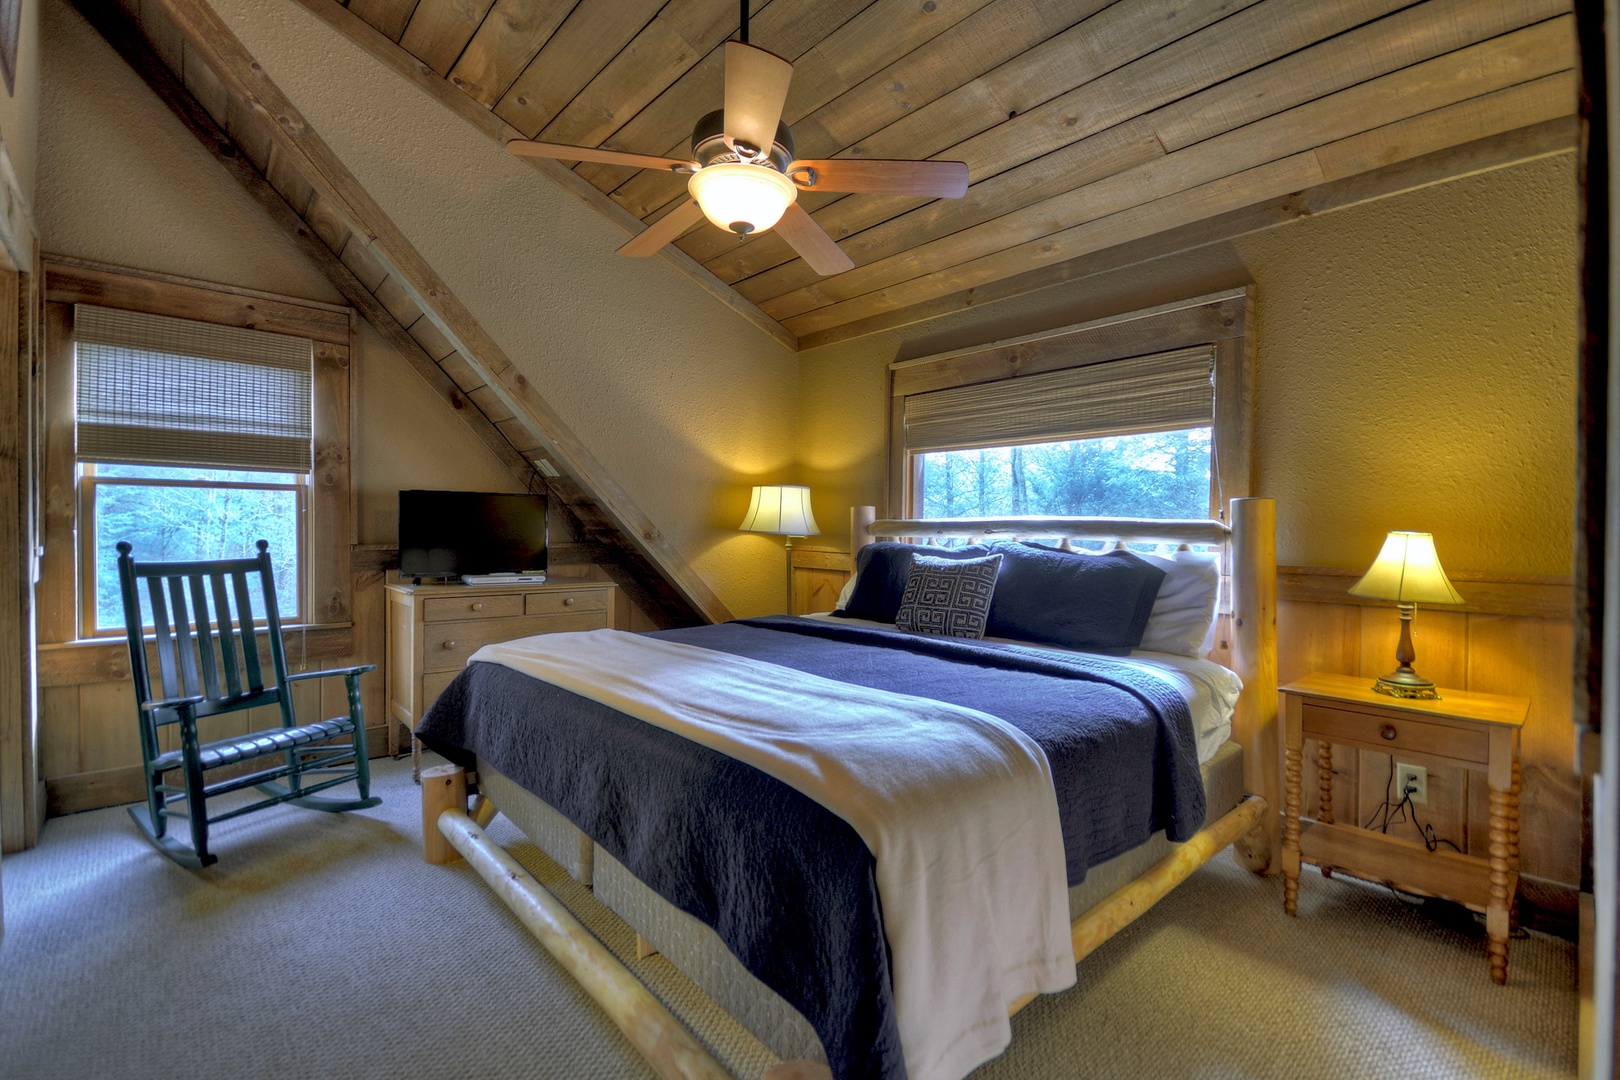 Reel Creek Lodge- Upper level king bedroom with a rocking chair and TV